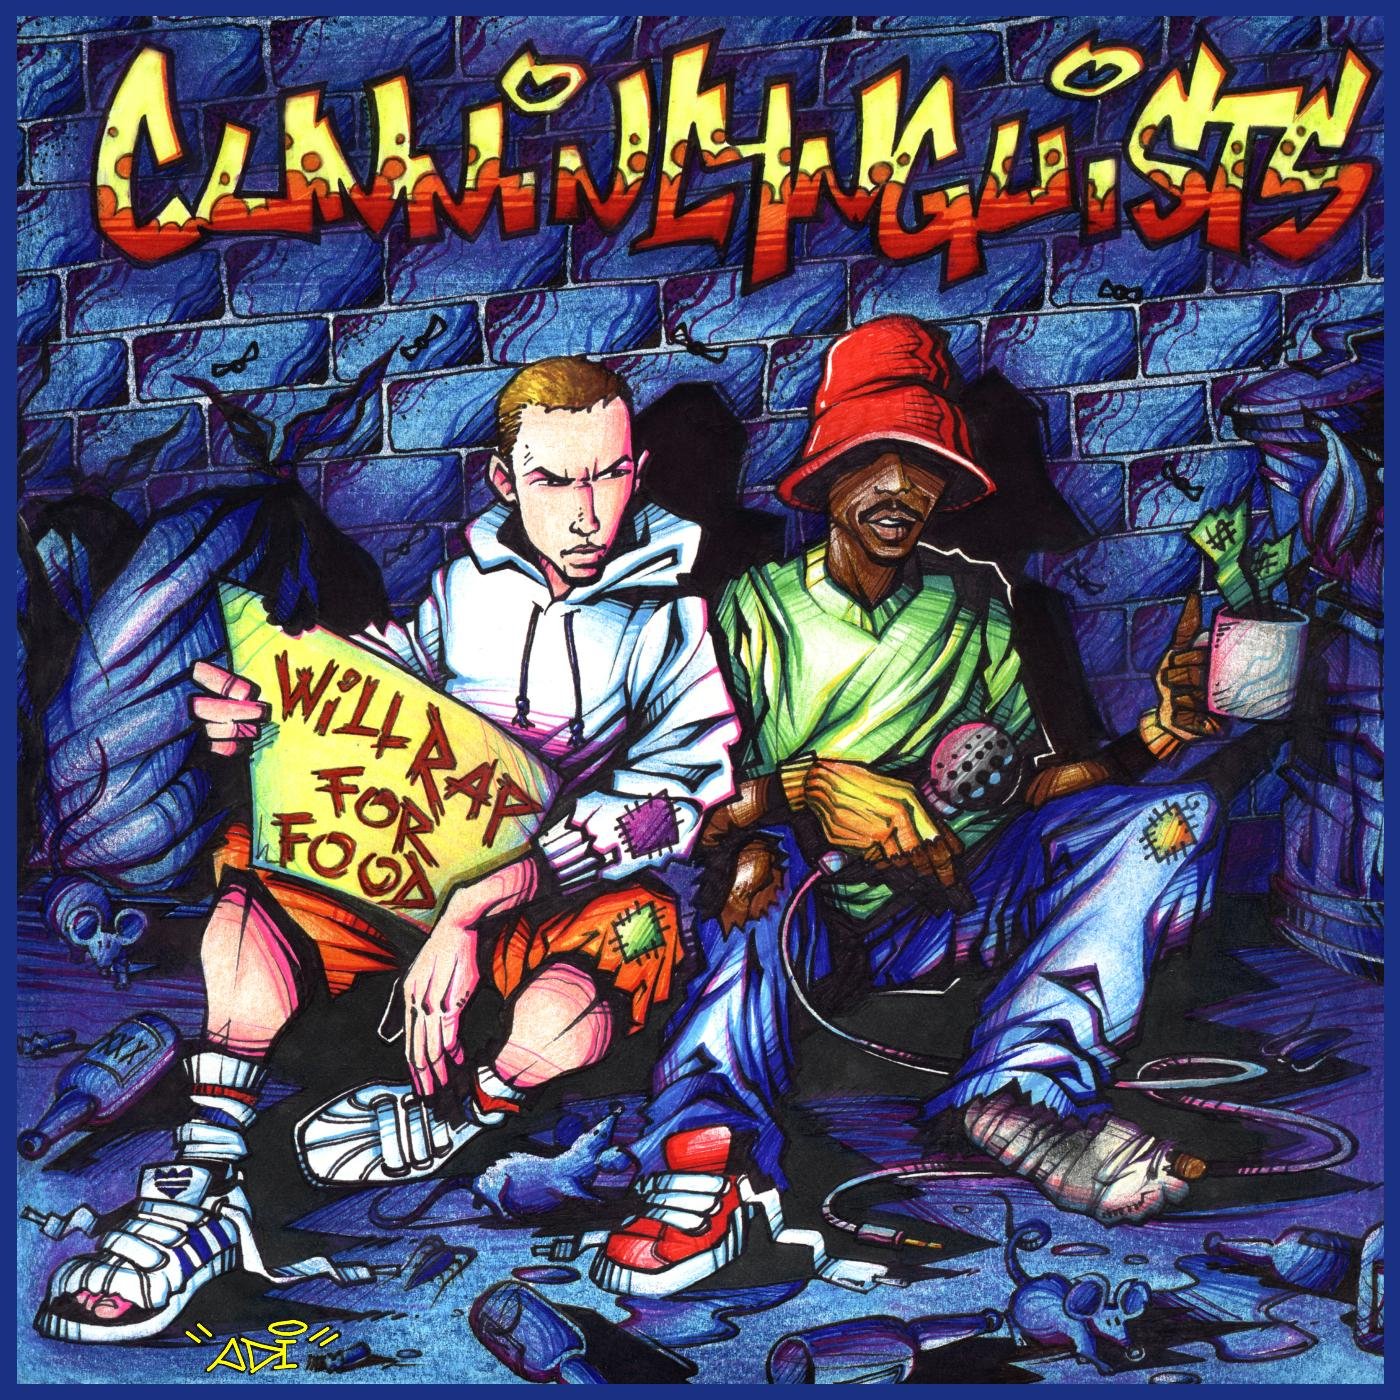 Cunninlynguists - Will Rap For Food (2002) Vinyl FLAC Download